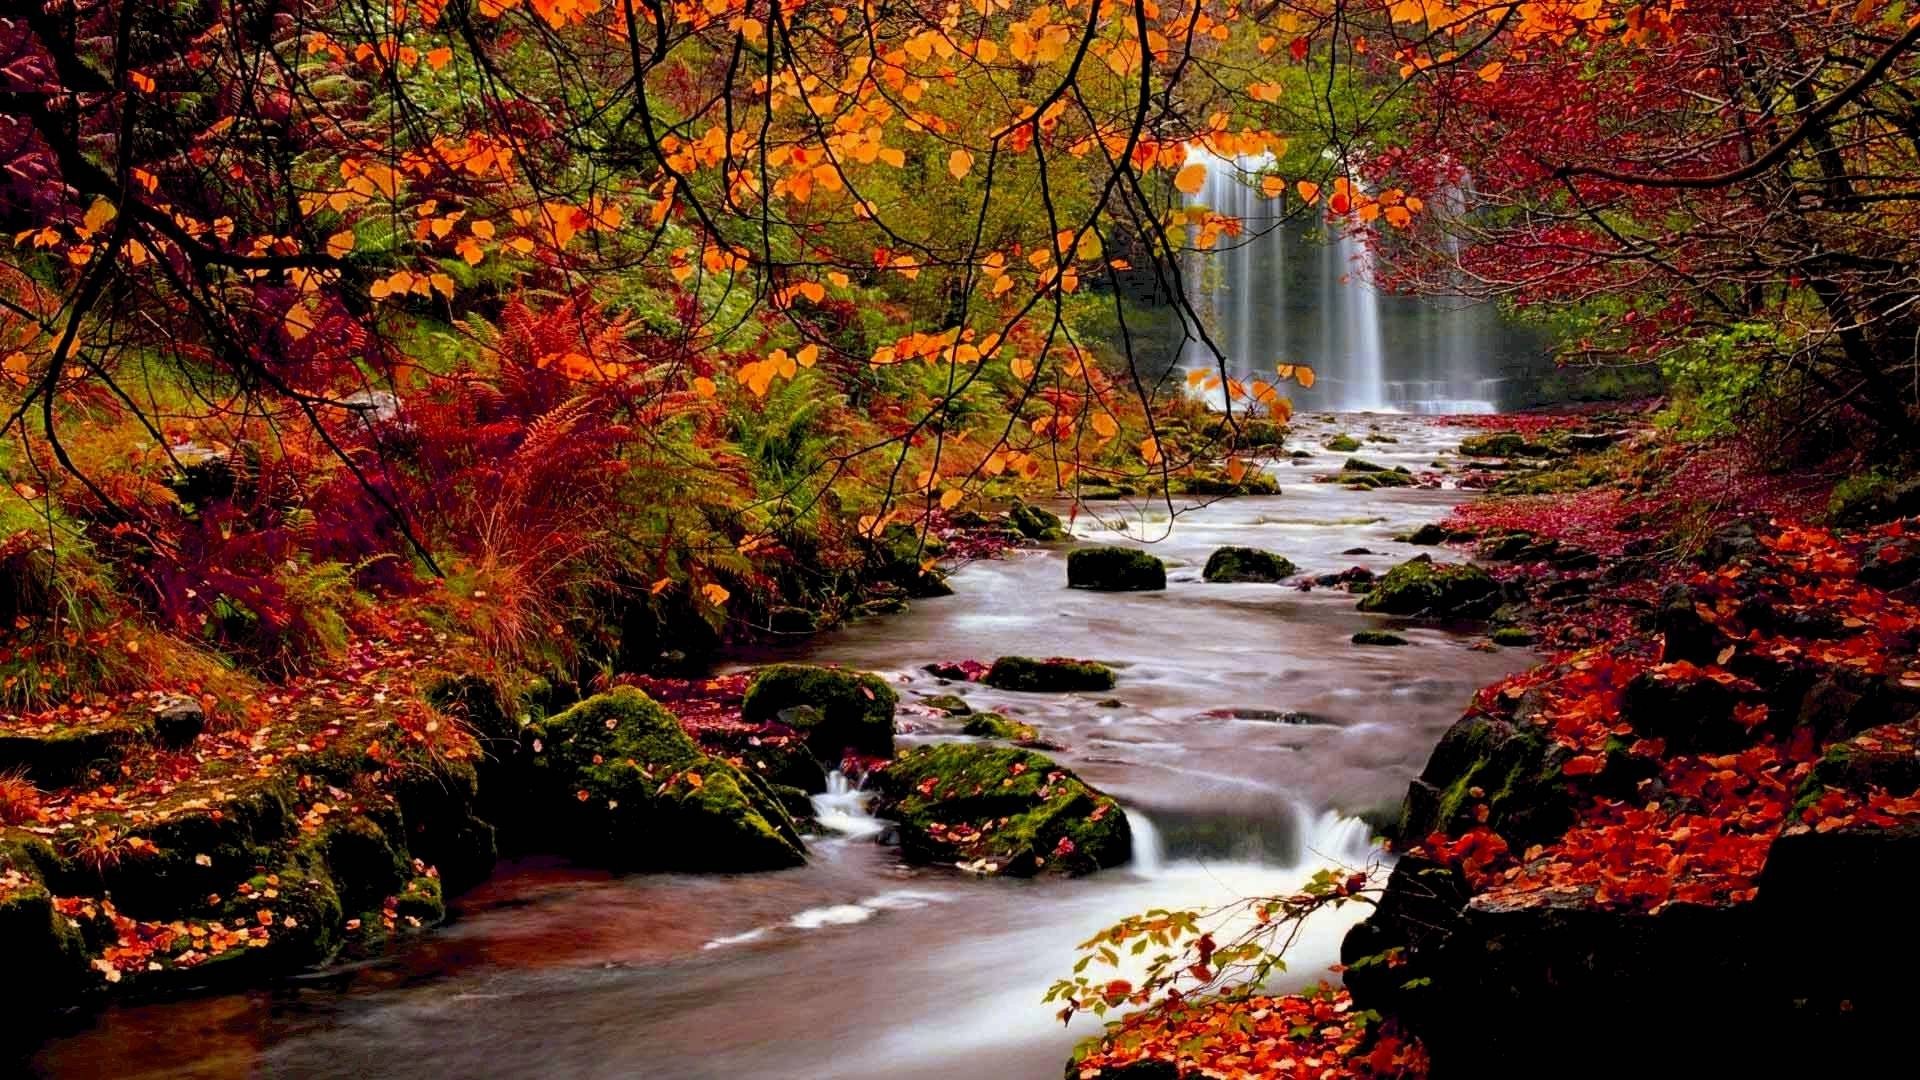 1920x1080 Fall Scenery Wallpapers - Wallpaper Cave Autumn Scenery Wallpaper -  Wallpapers Browse ...